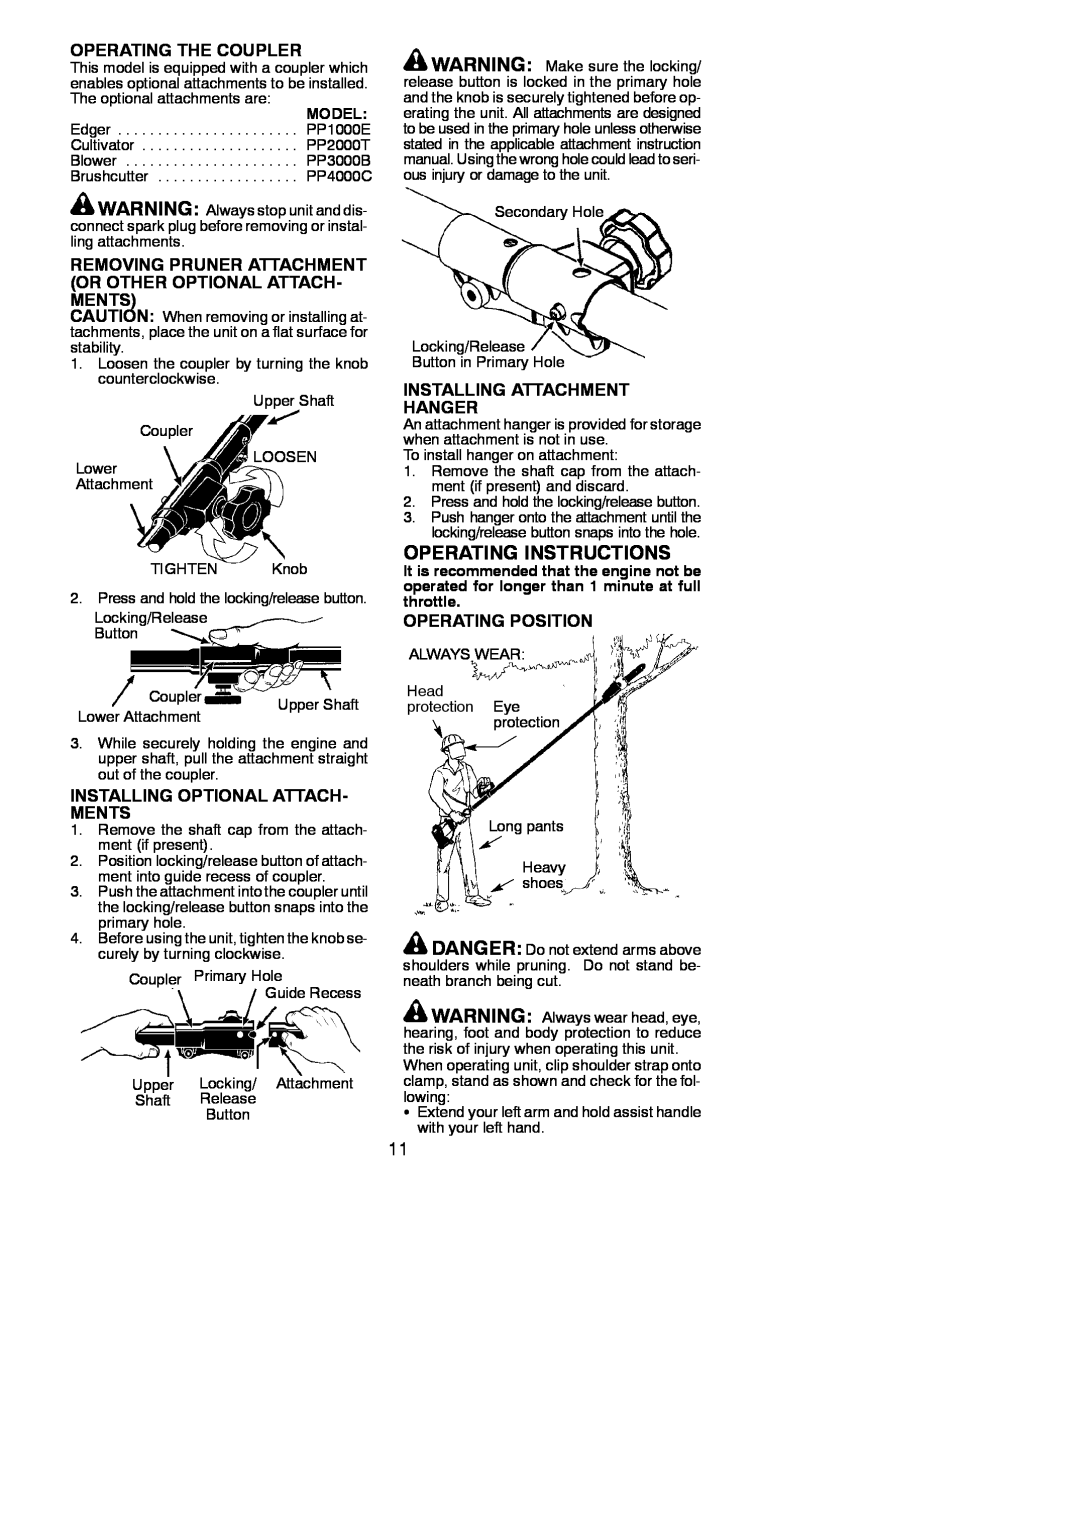 Poulan 545137281 Operating Instructions, Operating The Coupler, Removing Pruner Attachment Or Other Optional Attach Ments 